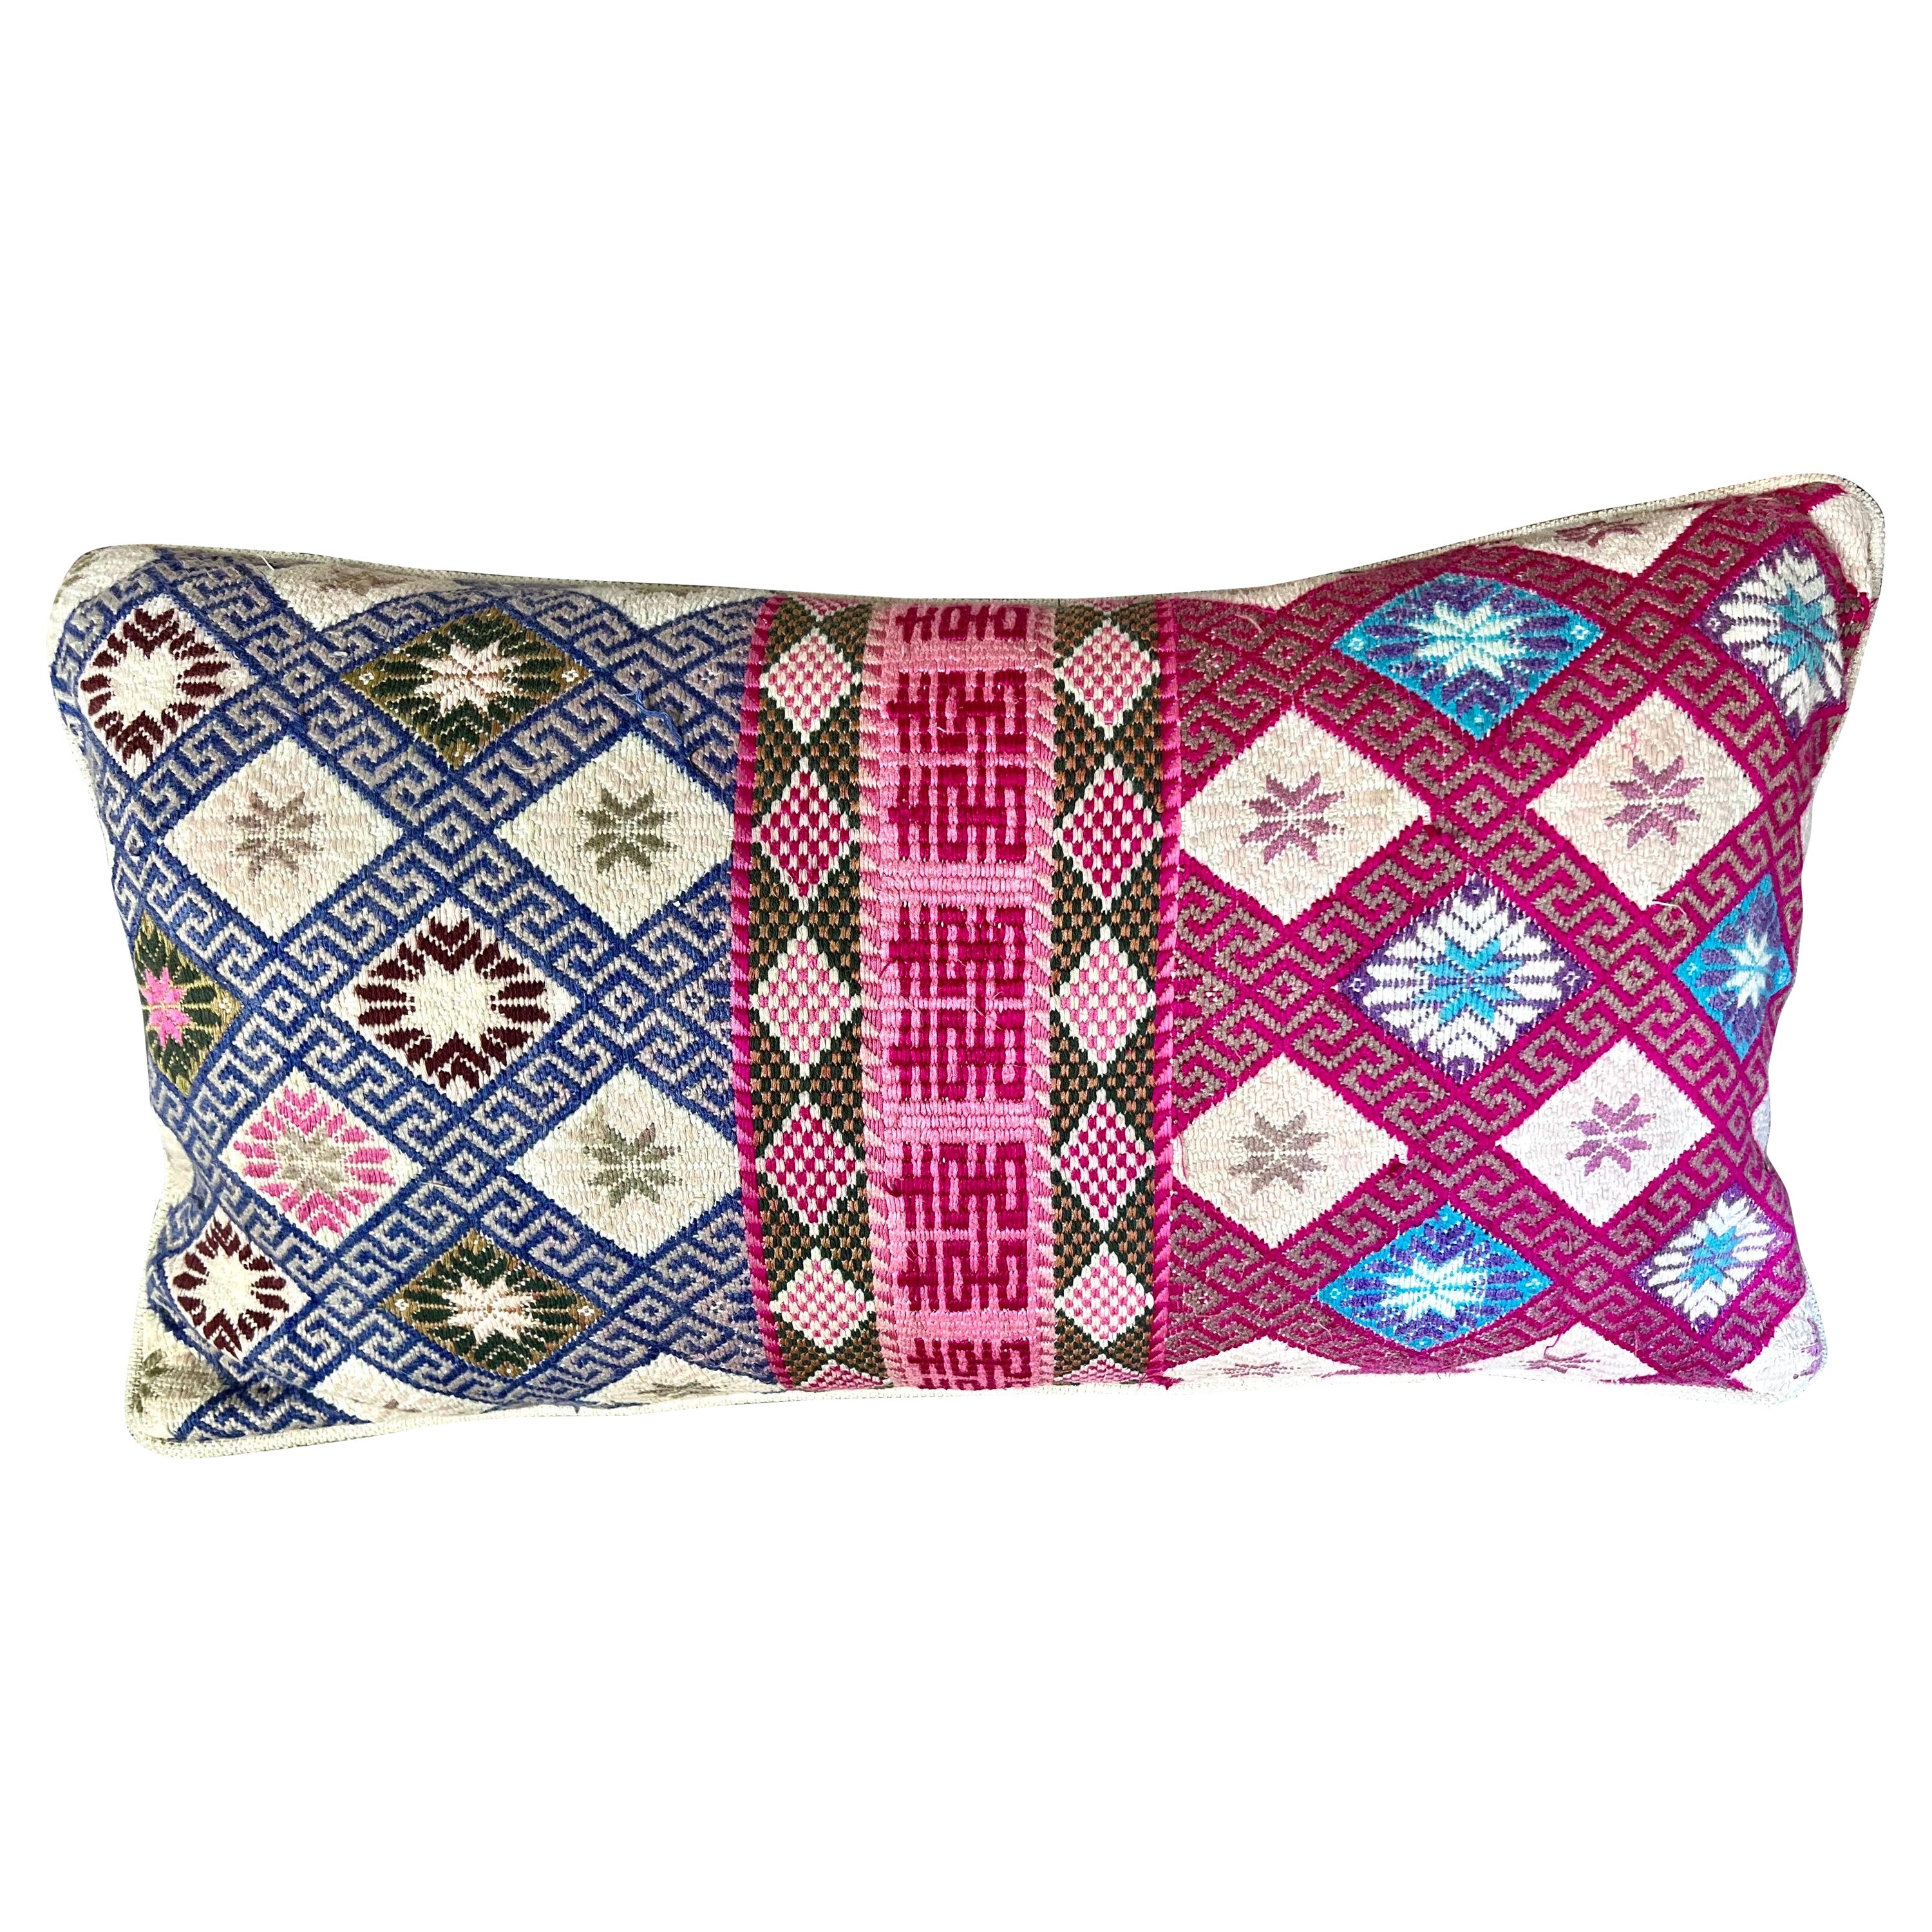 Pair of Vibrant Woven Geometric Tribal Style Pillows For Sale